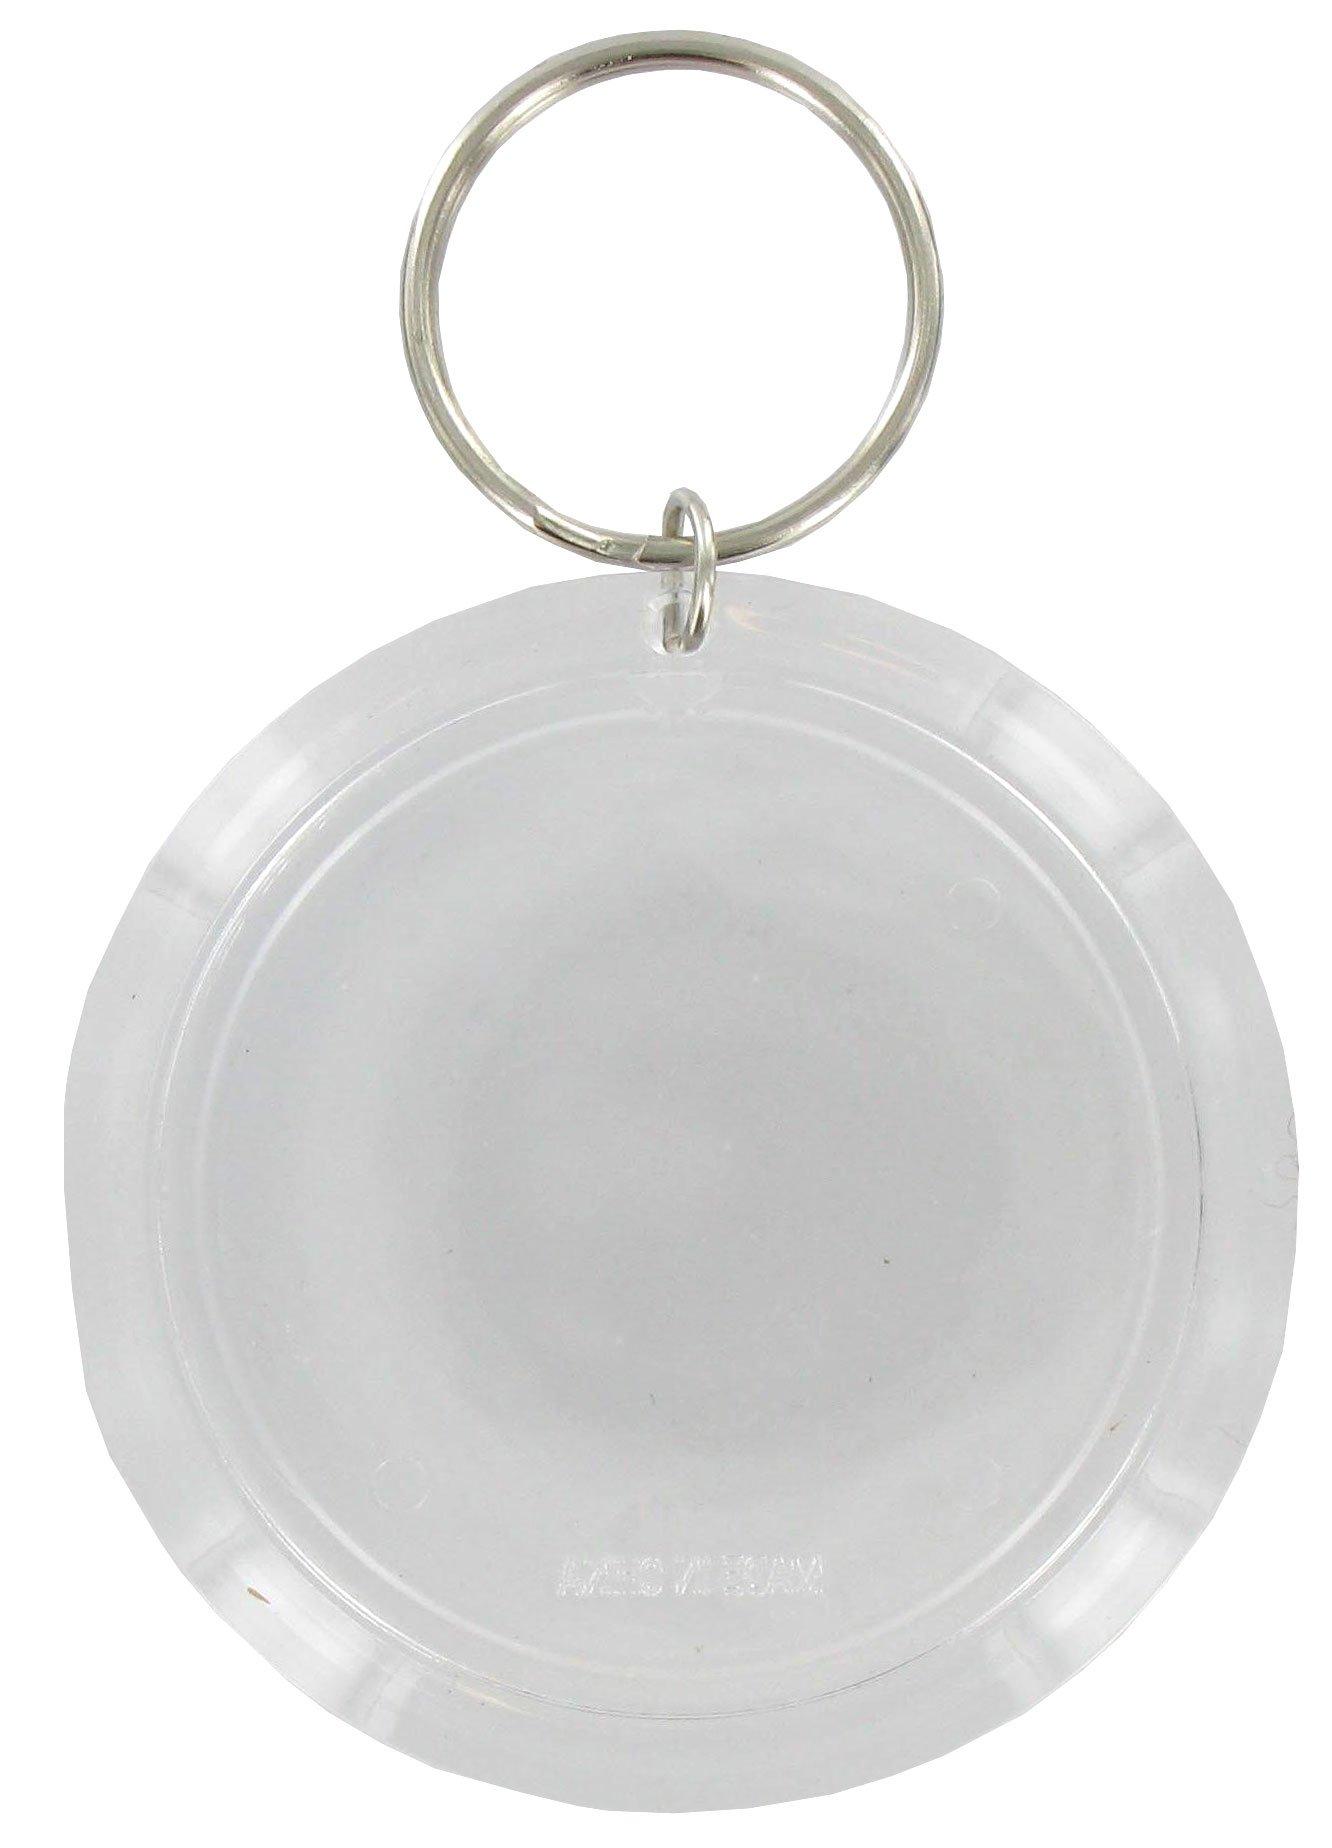 Buy Standard Quality China Wholesale Acrylic Keychain Display, 2-side With  Lock And Key, Can Moved Round, Hooks Can Hang Keychain $8 Direct from  Factory at Eureka Acrylic Products Co. Limited